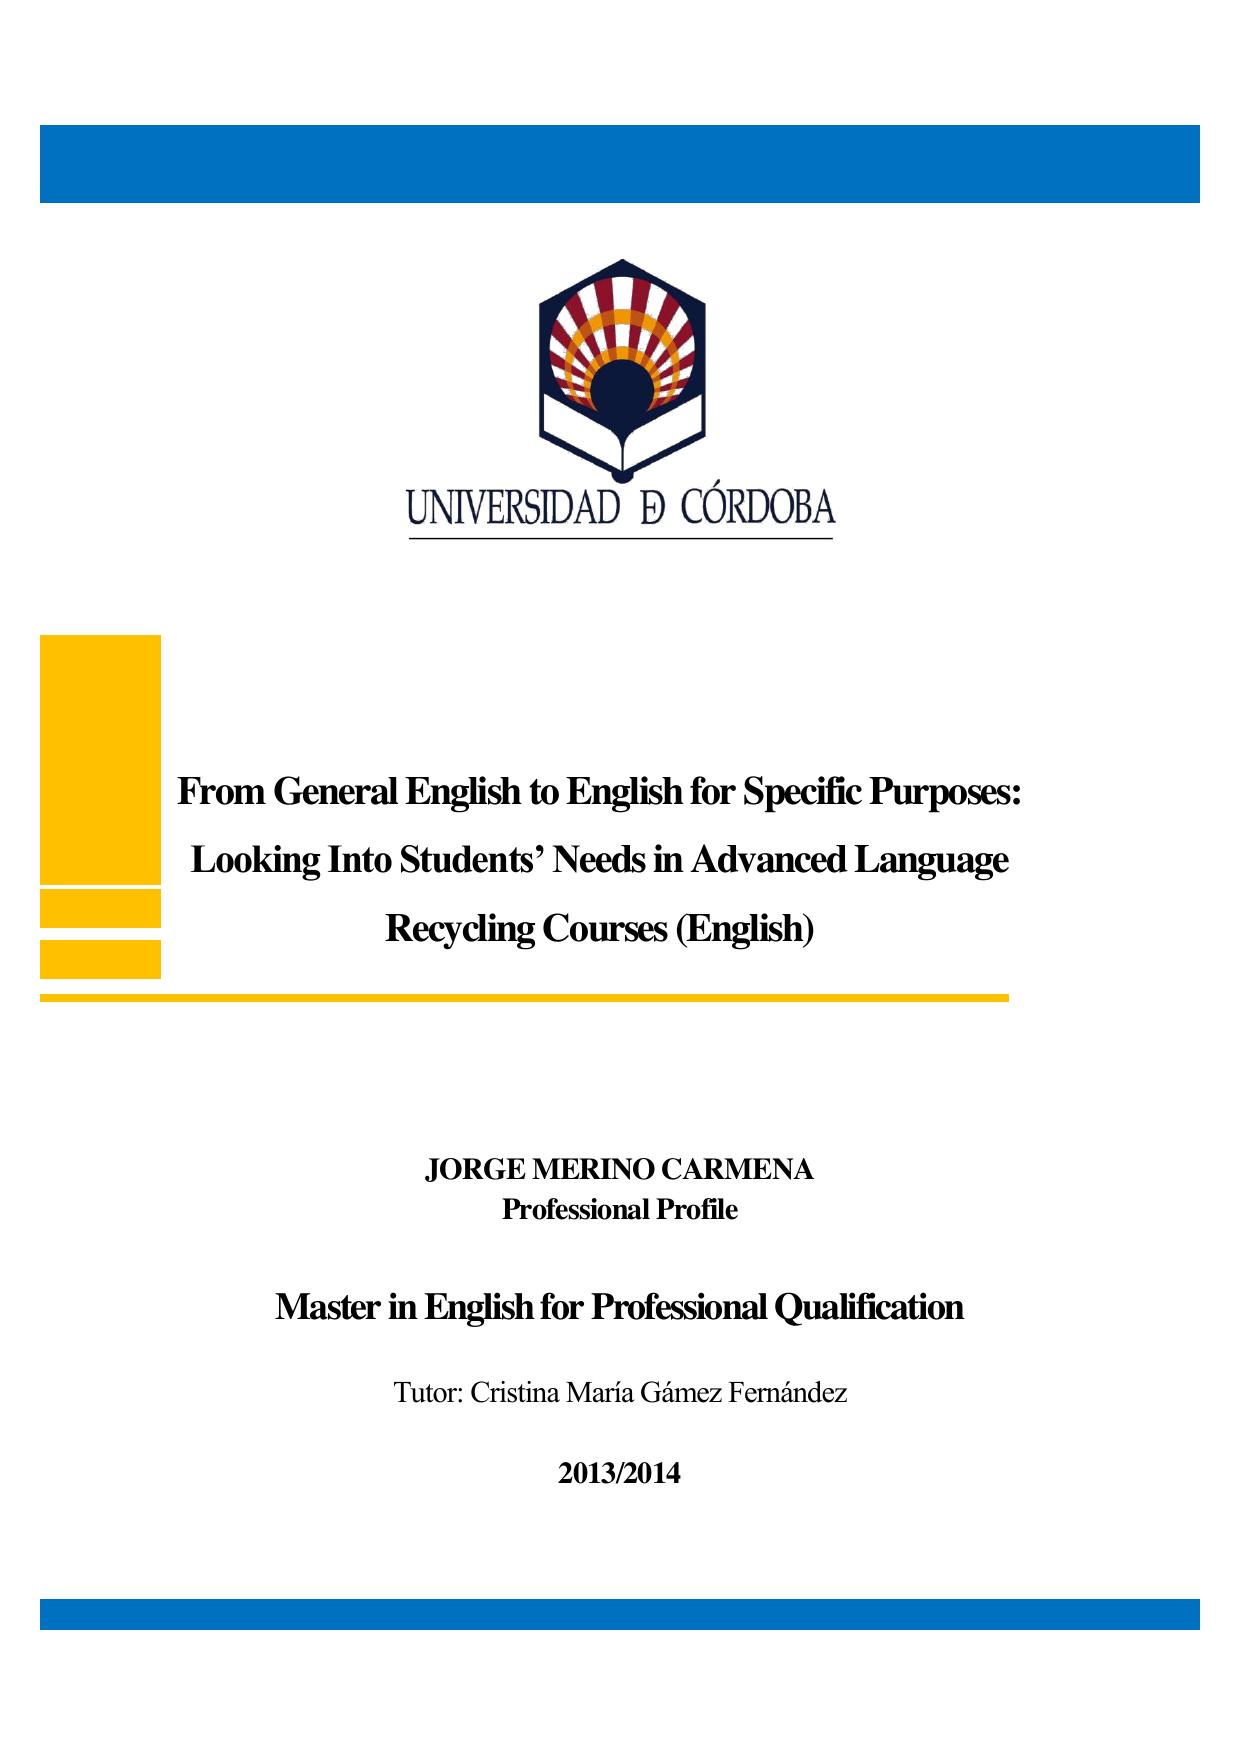 From General English to English for Specifi Purposes- Looking into Students' Needs in Advanced Language